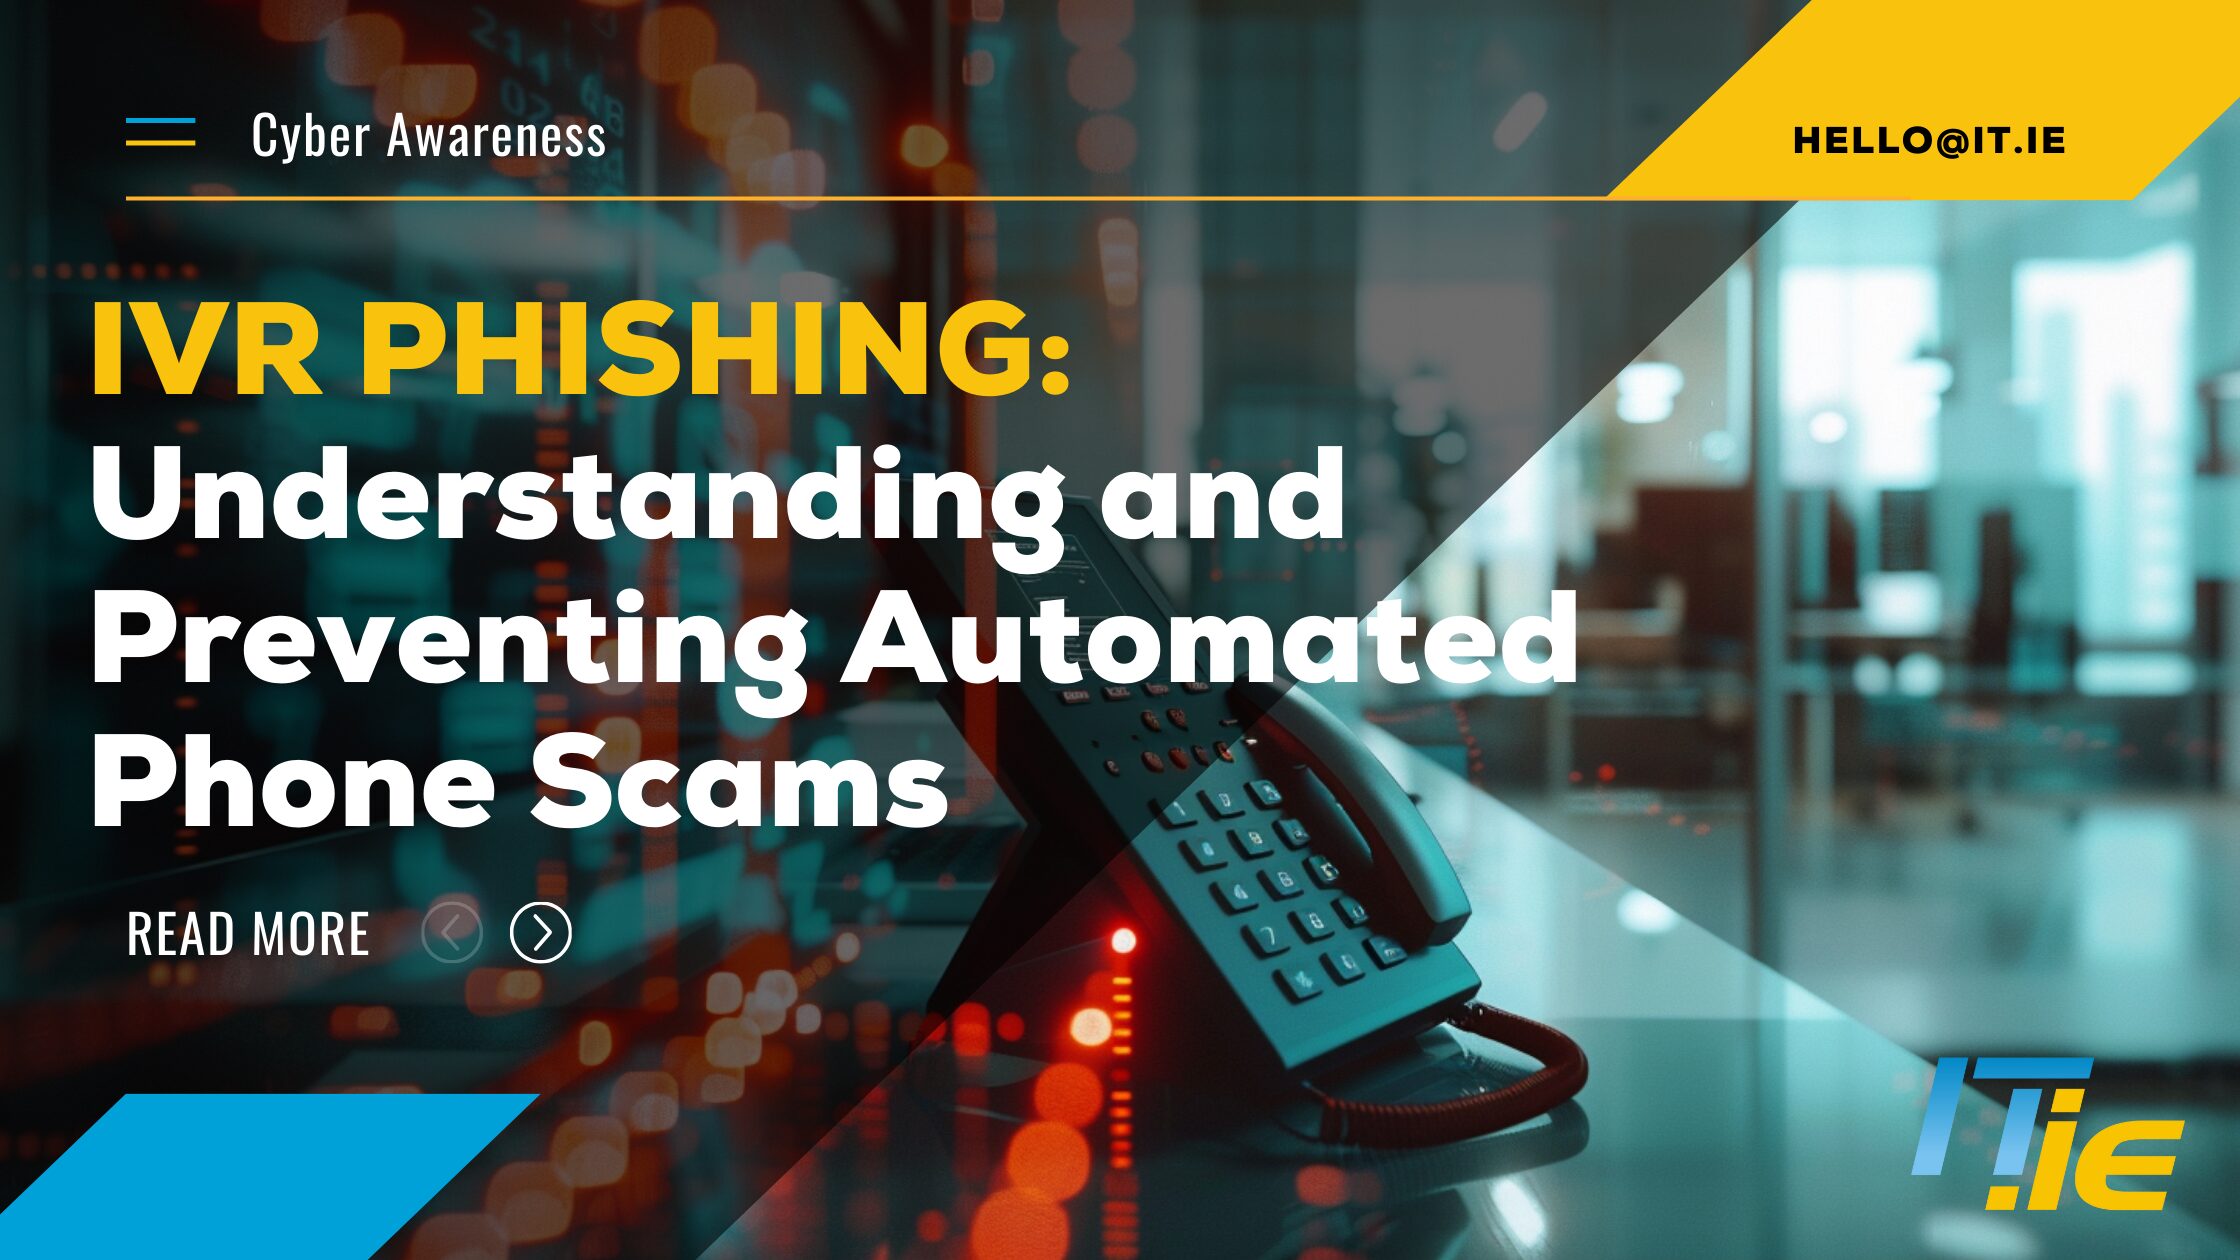 IVR Phishing: Understanding and Preventing Automated Phone Scams